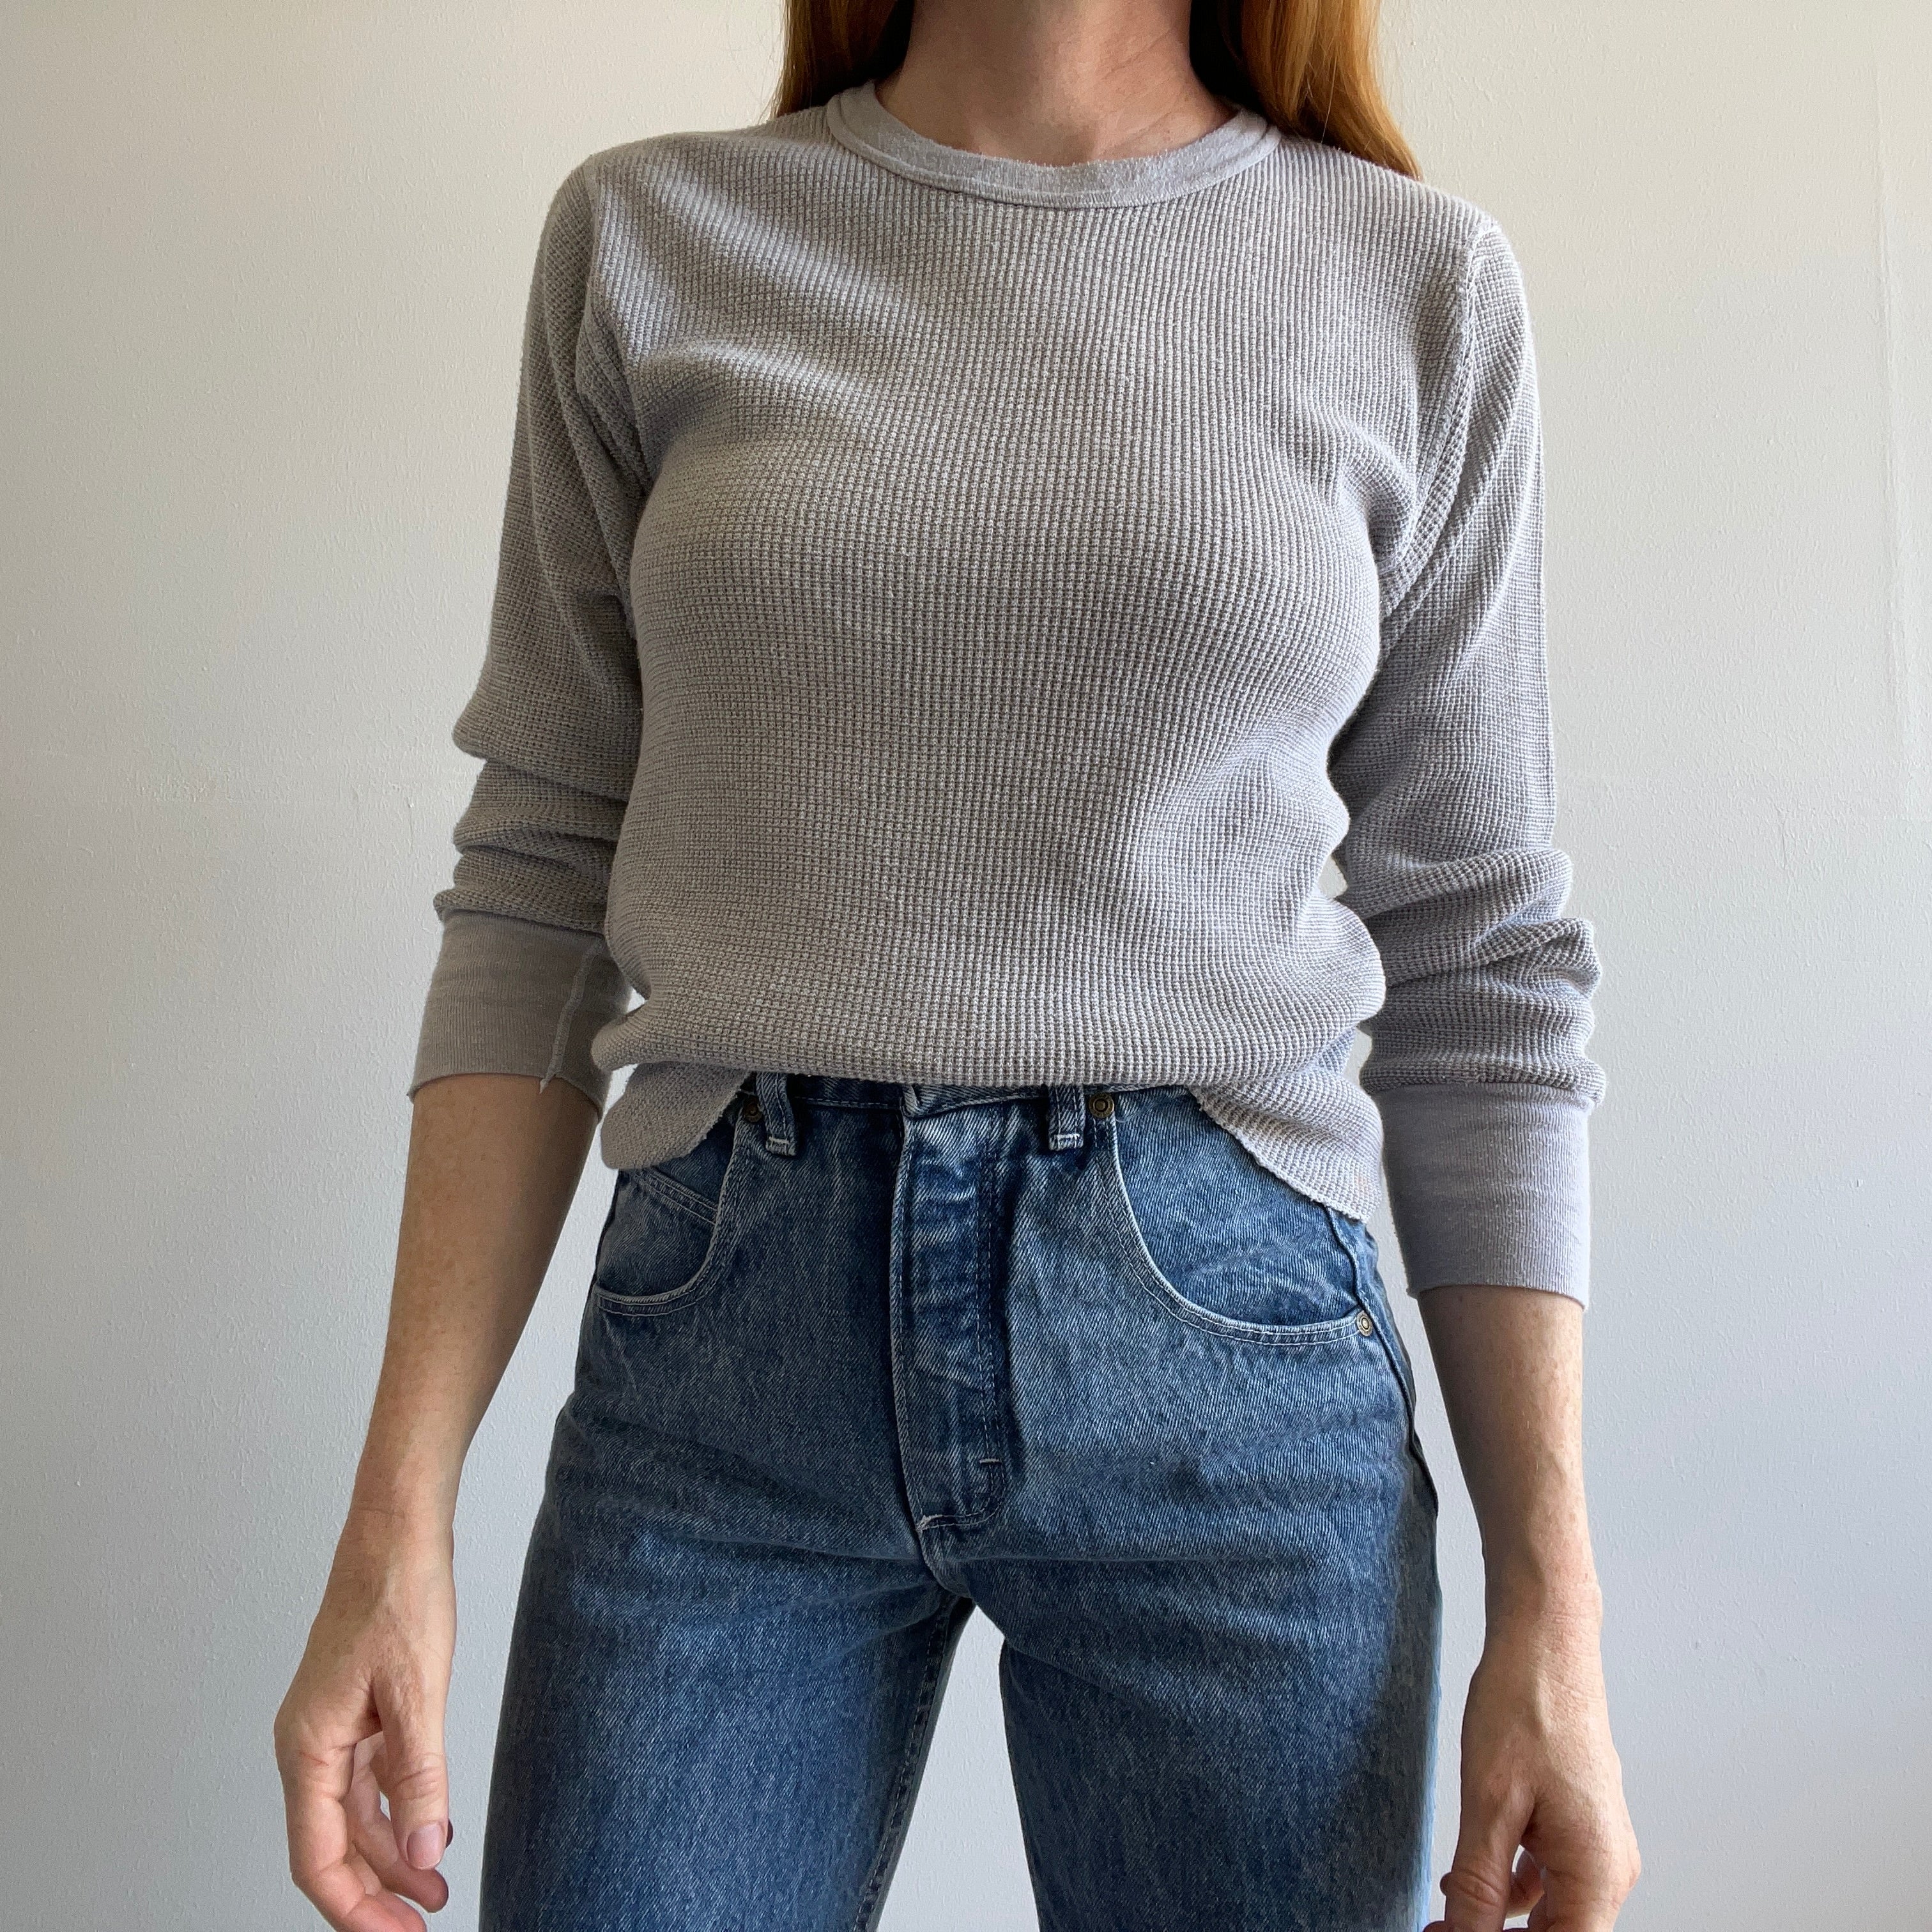 GG 1970s Stretchy Gray Long Sleeve Thermal by FOTL